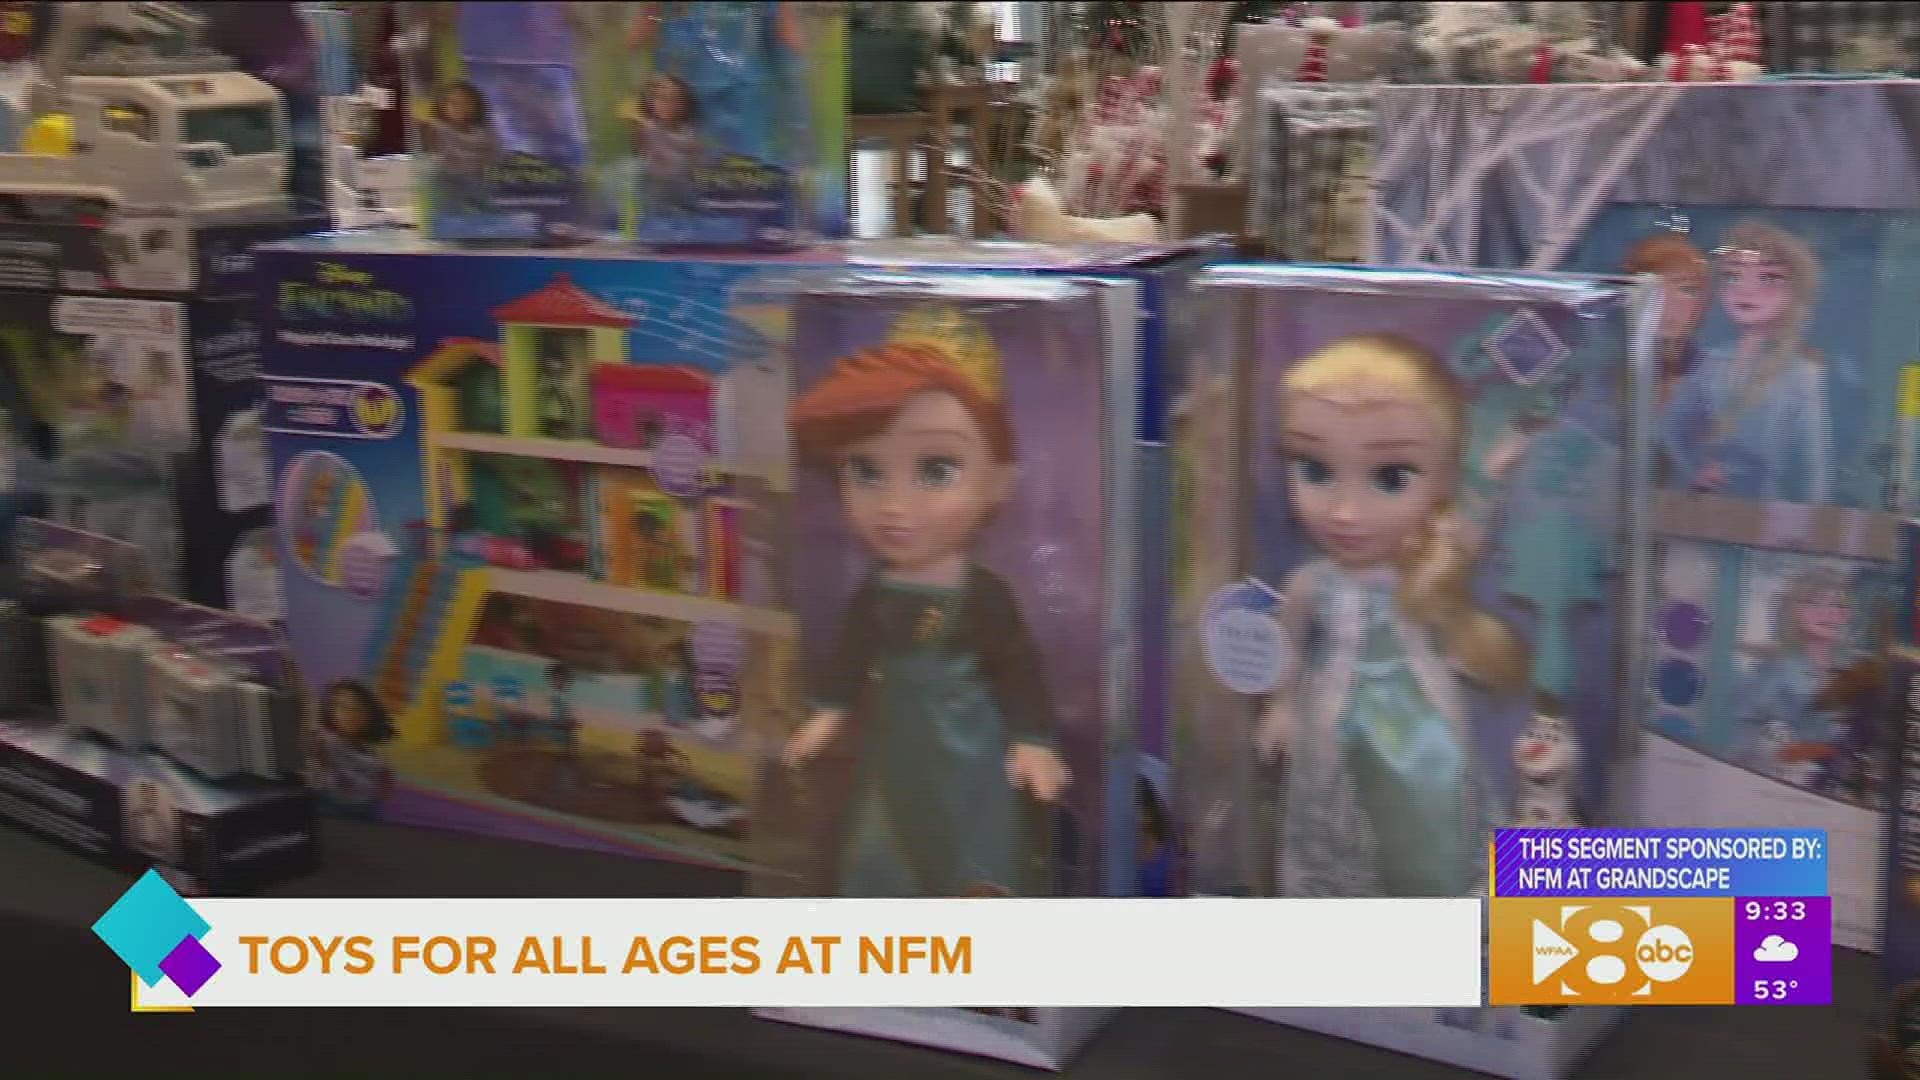 Chris Woolsey shows us toys for all age groups. This segment is sponsored by NFM at Grandscape. Go to nfm.com for more information.